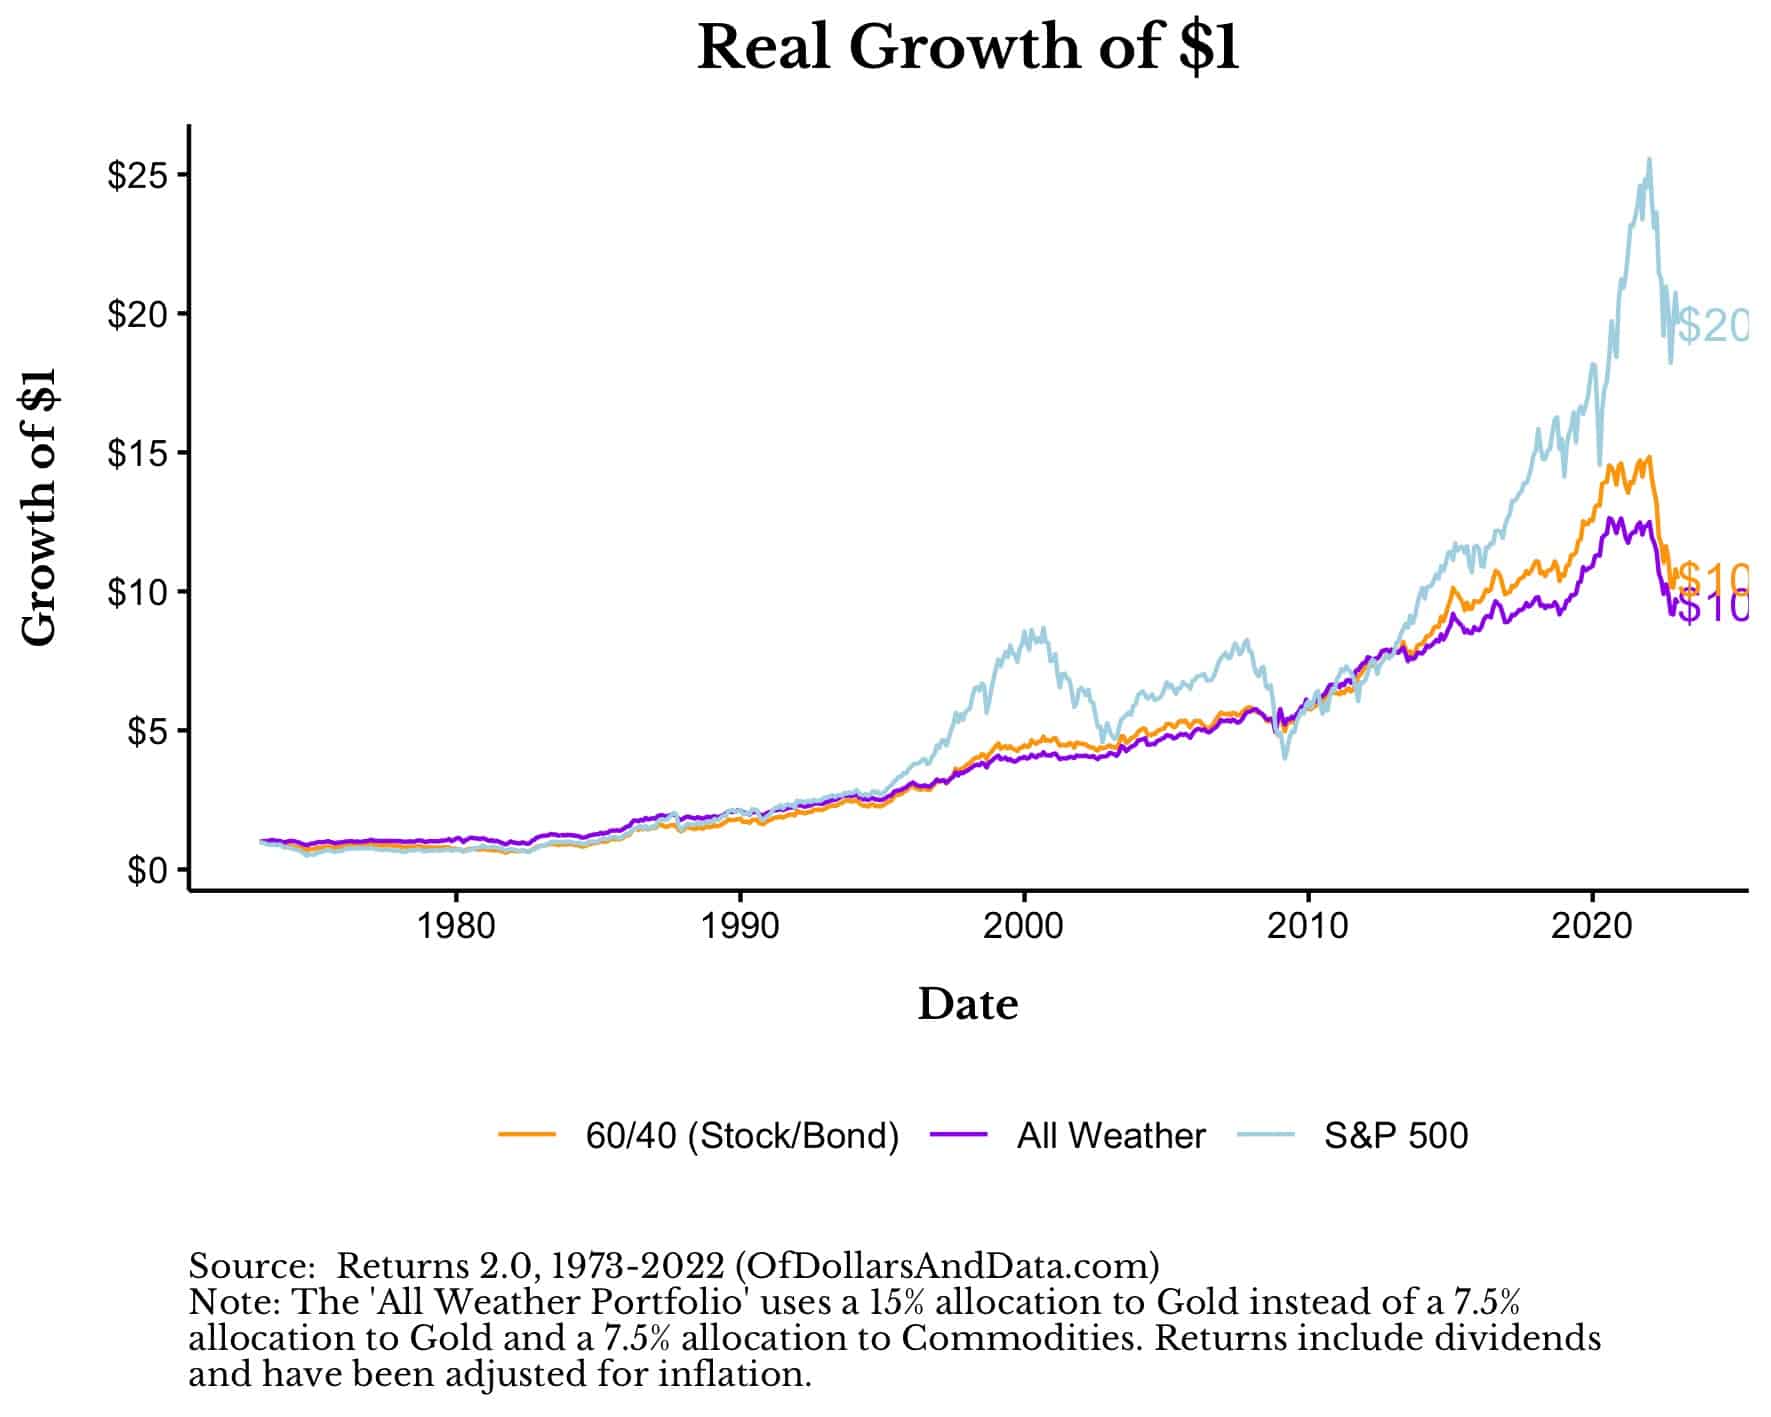 Growth of $1 in the 60/40, All Weather Portfolio, and the S&P 500 from 1973 to 2022.